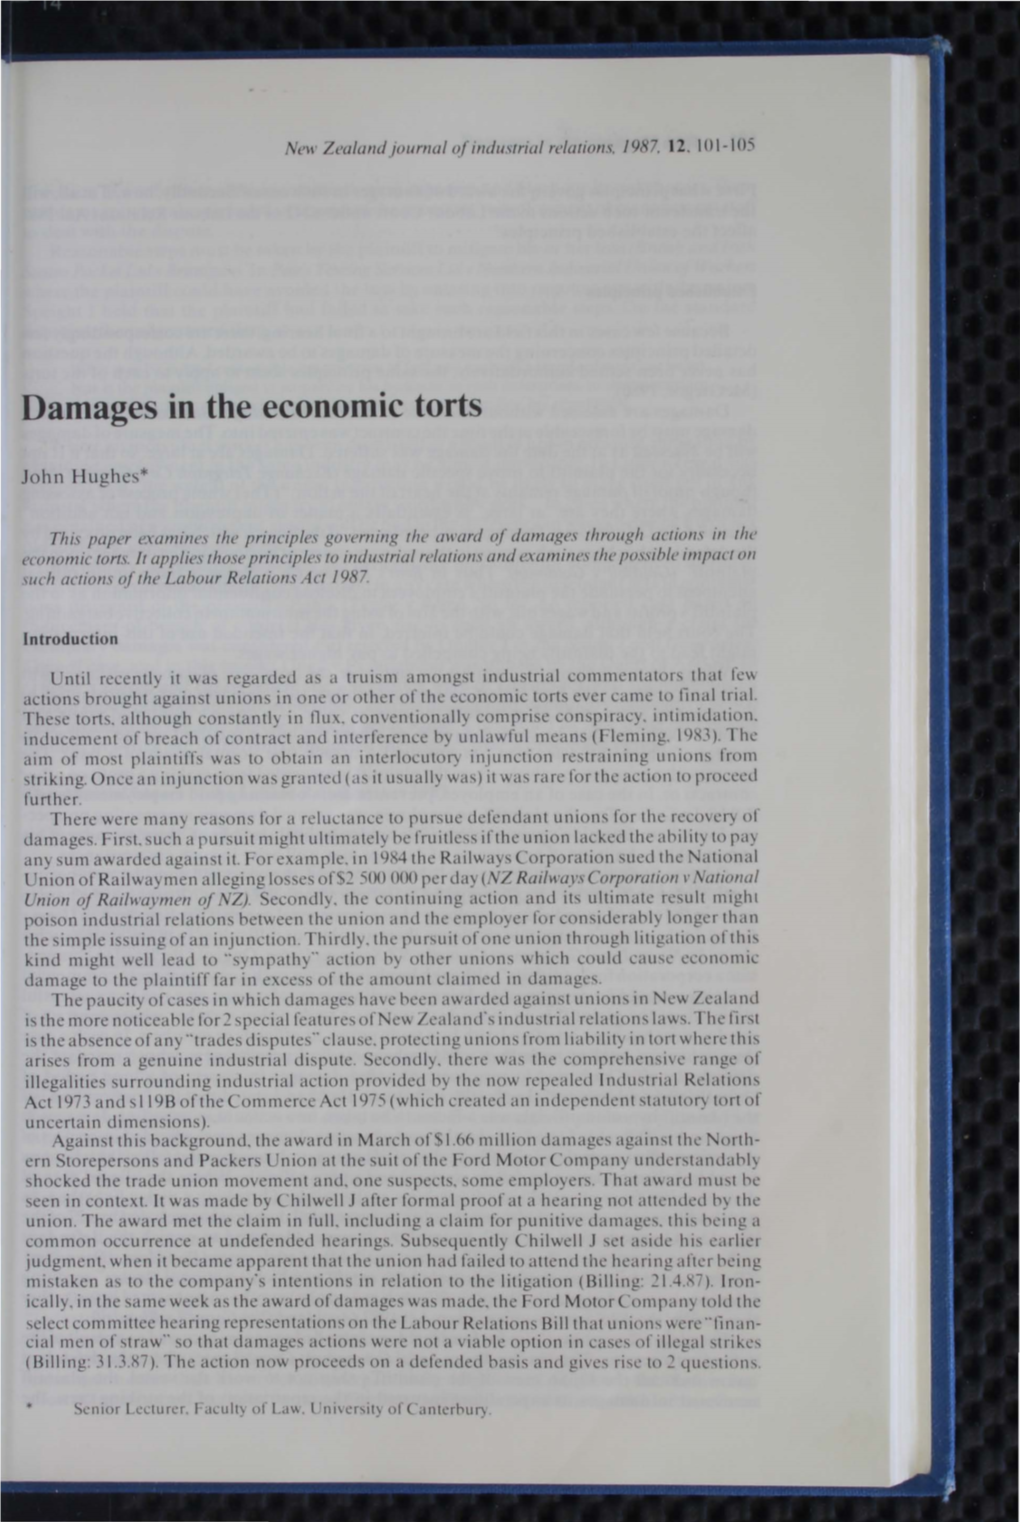 Damages in the Economic Torts